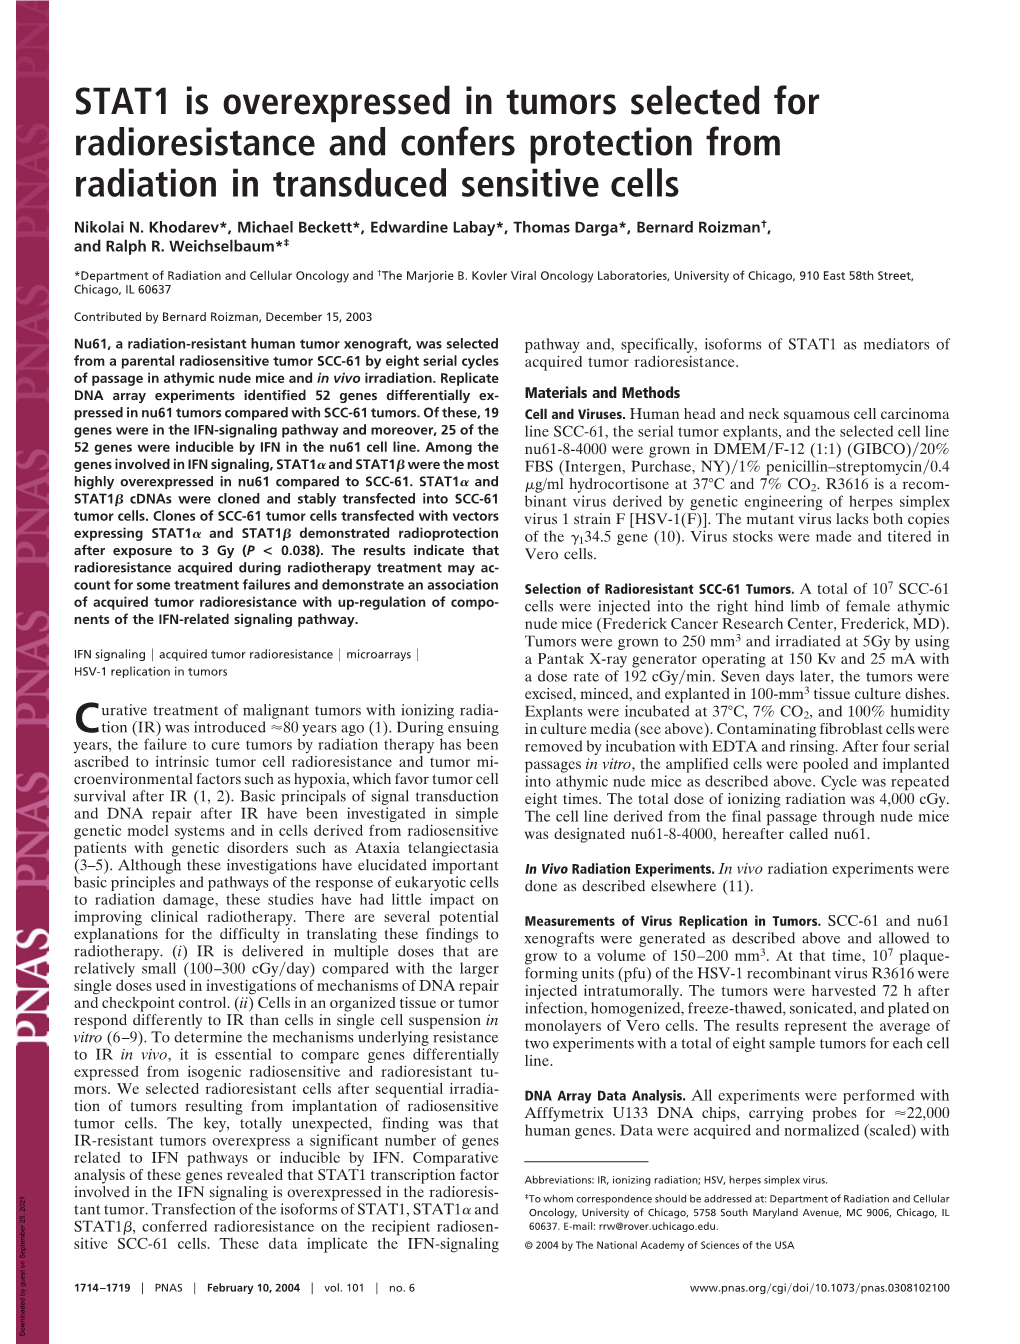 STAT1 Is Overexpressed in Tumors Selected for Radioresistance and Confers Protection from Radiation in Transduced Sensitive Cells